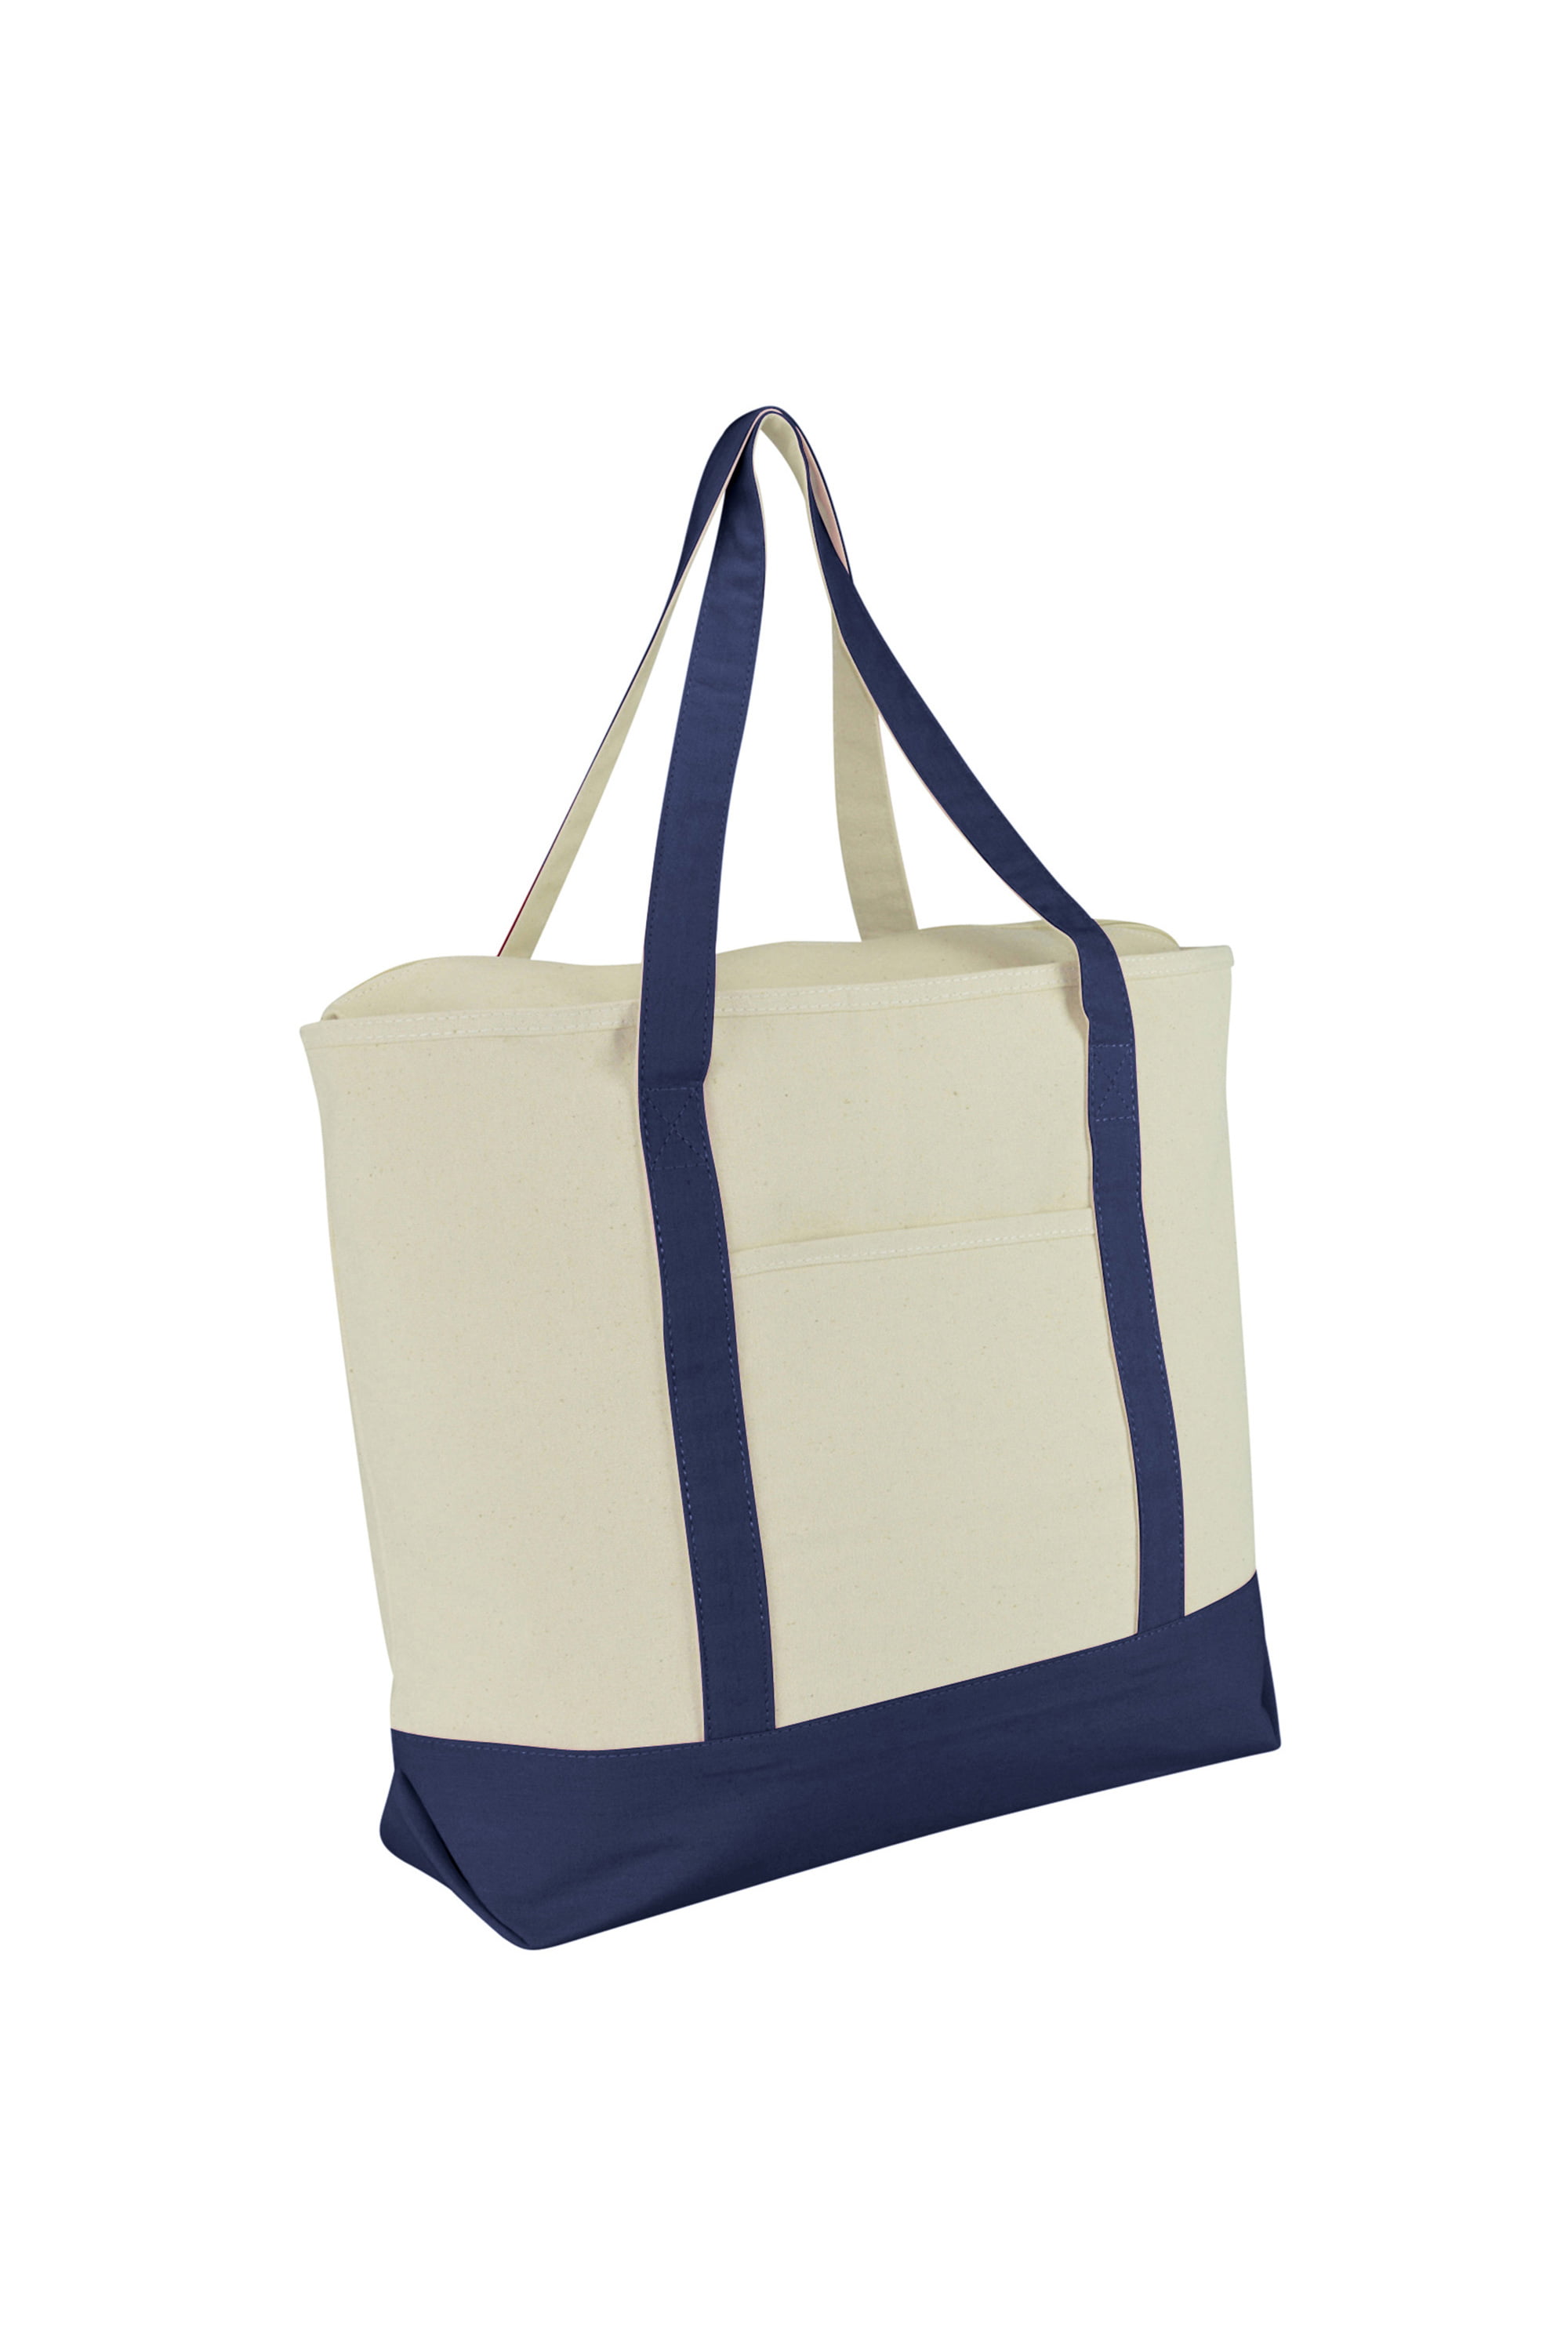 Large Deluxe Natural Cotton Canvas Reusable Zippered Grocery Shopping Totes Bag 